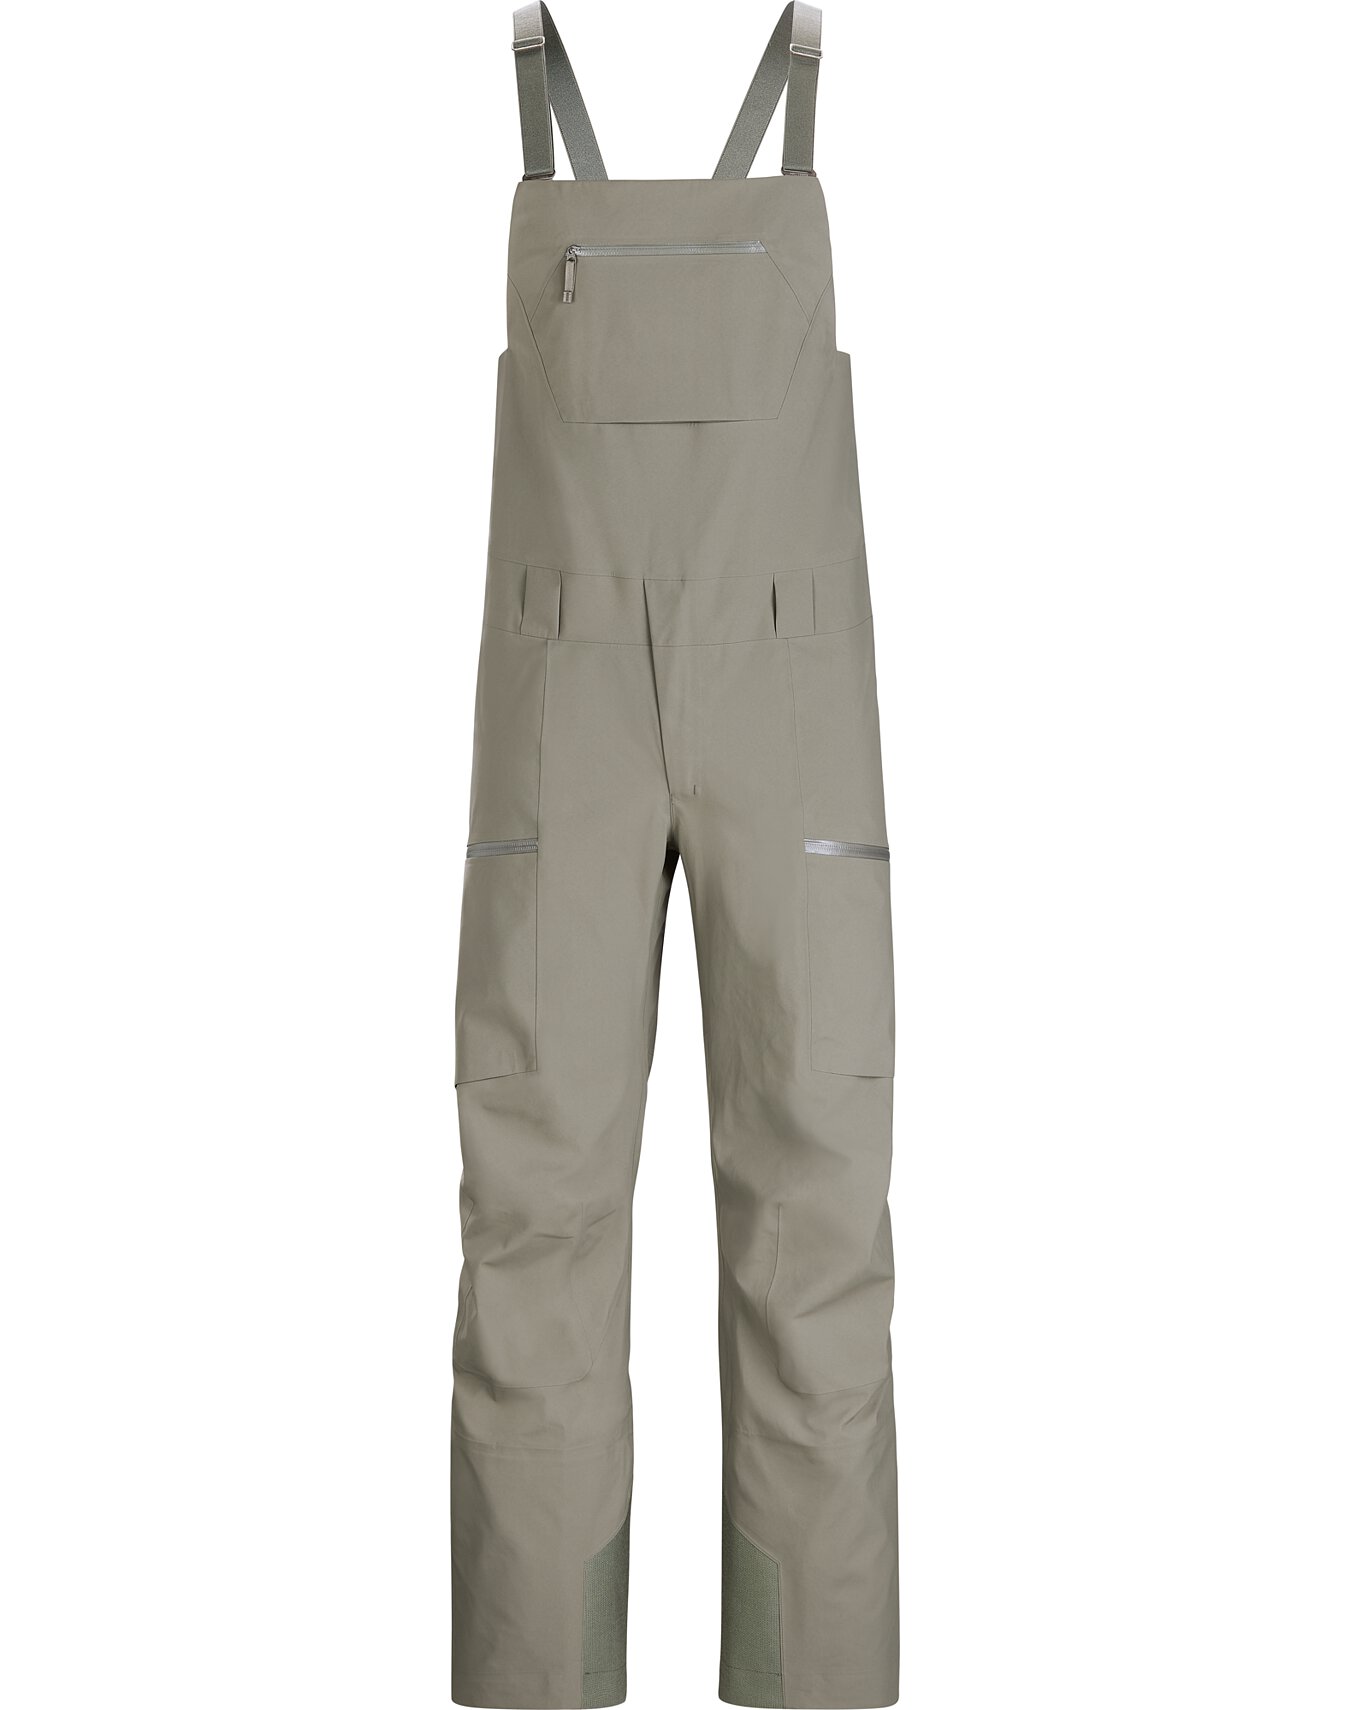 Arc'teryx Sabre Bibs for our review of the best snowboard Pants